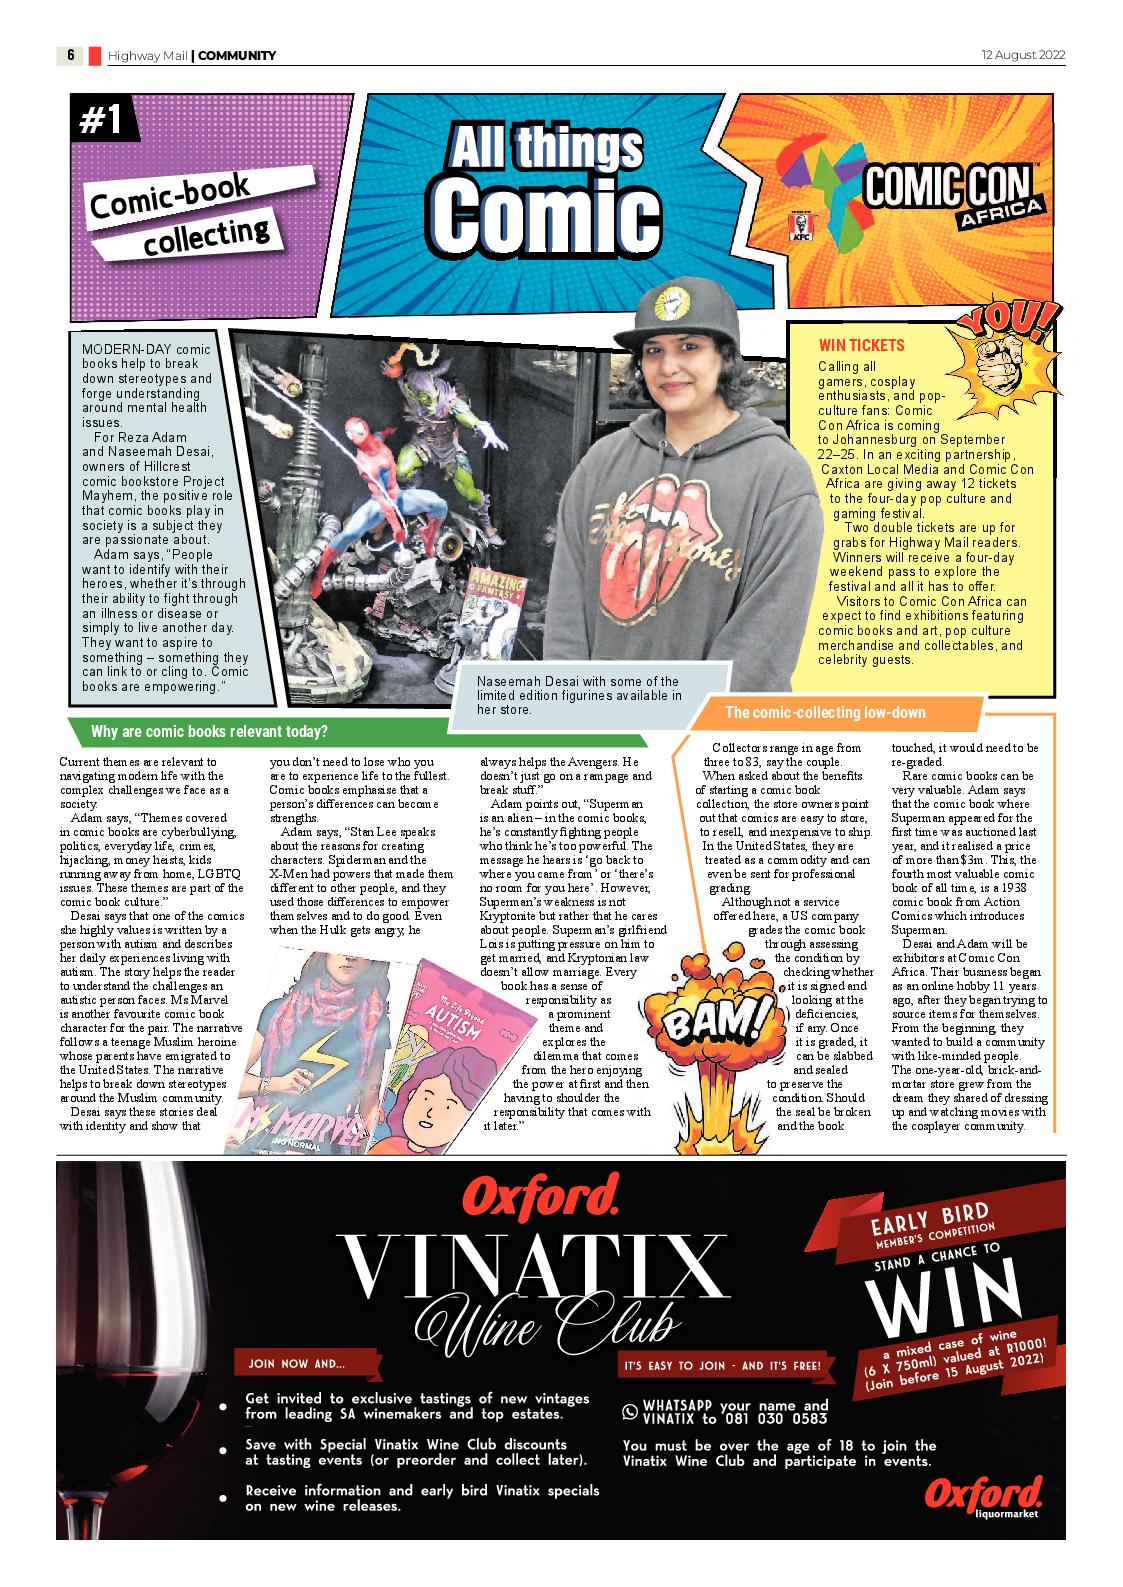 Highway Mail 12 August 2022 page 6